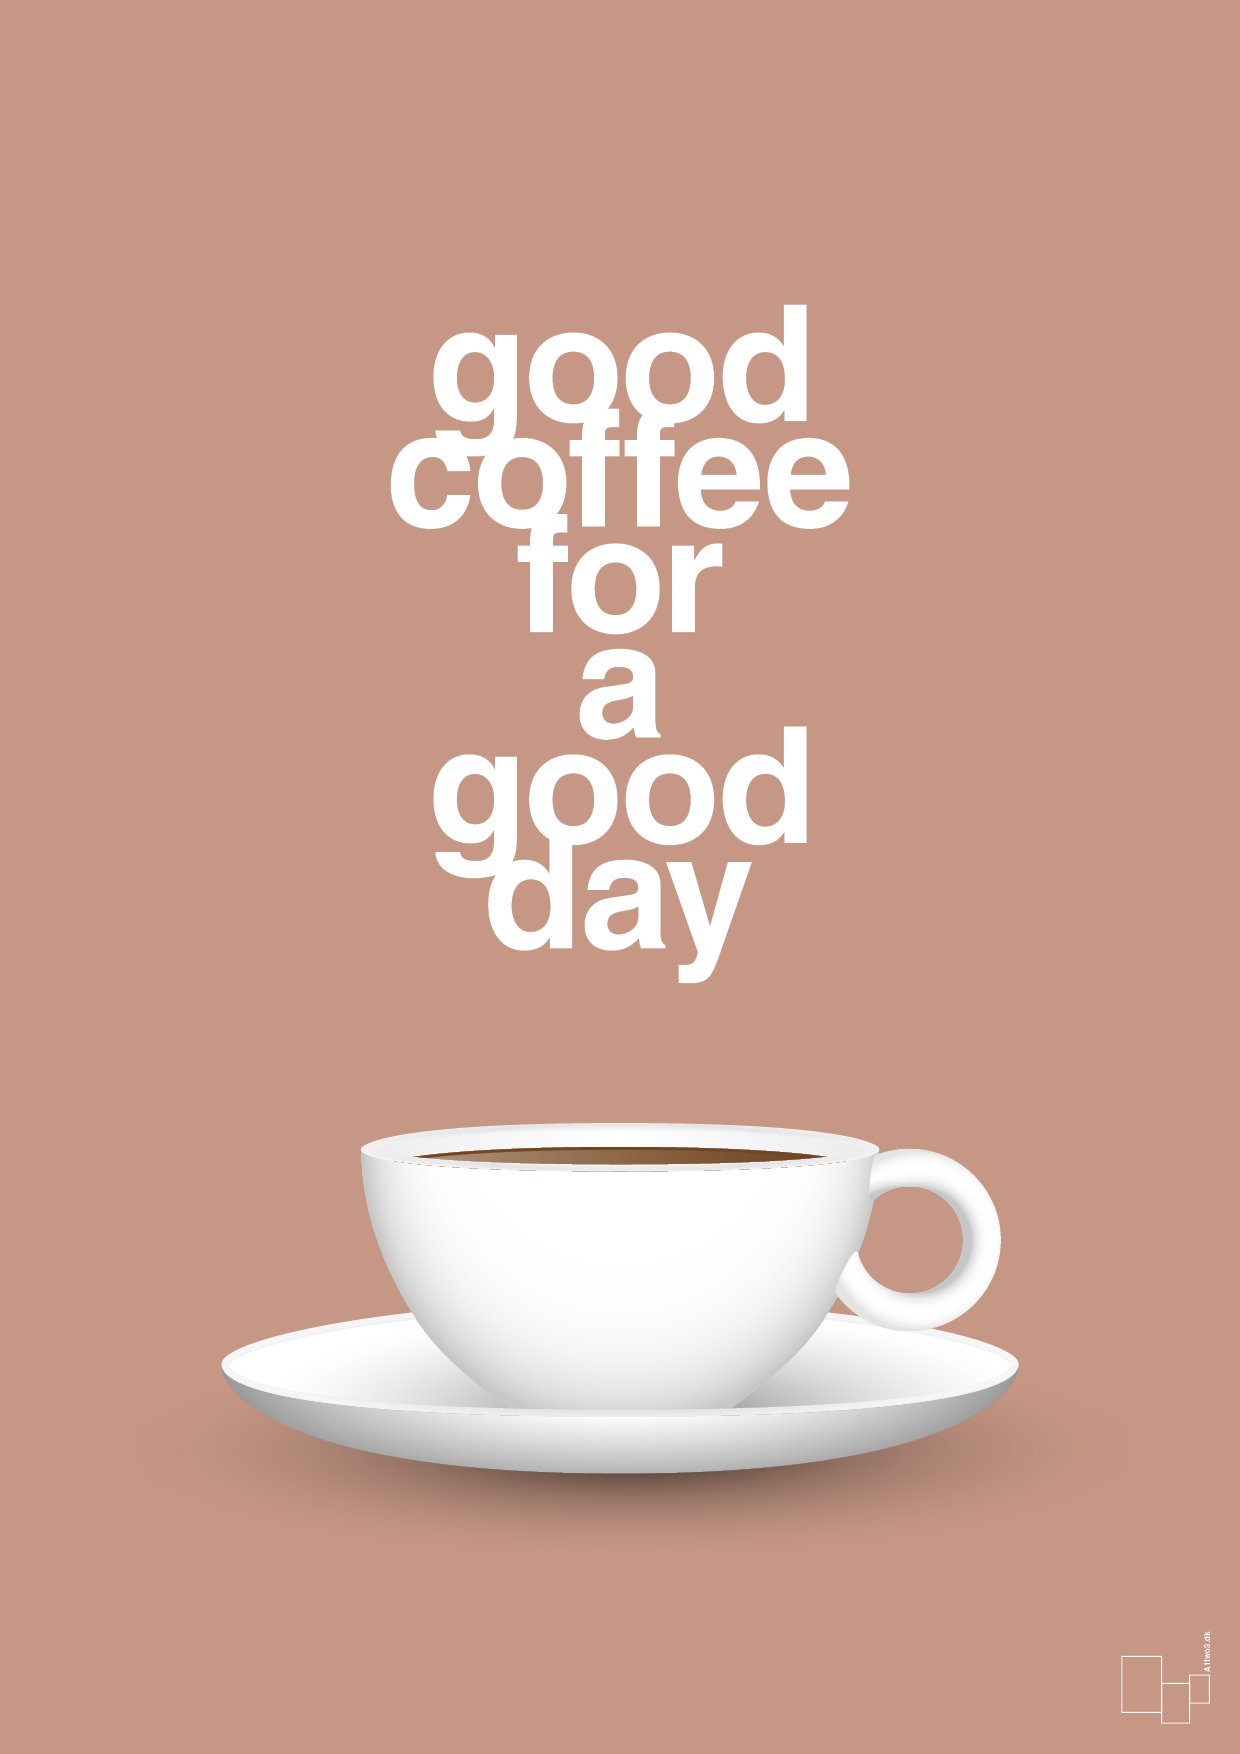 good coffee for a good day - Plakat med Mad & Drikke i Powder